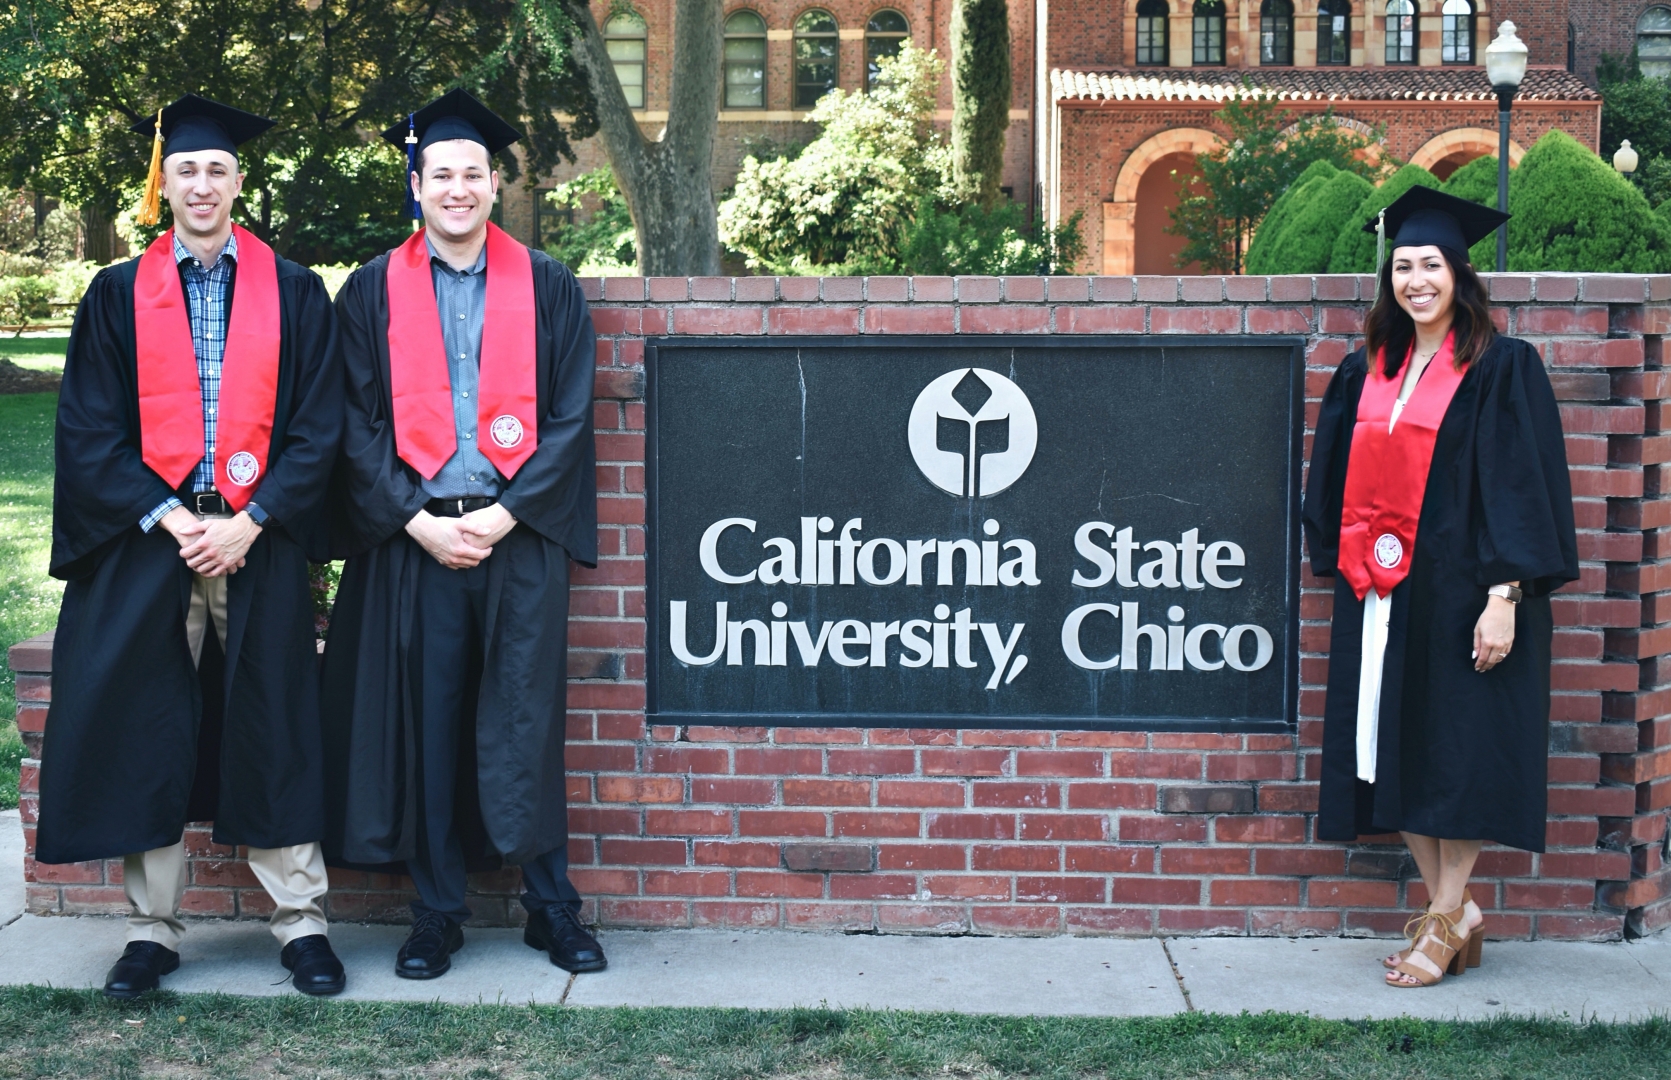 AJ, Nick, and Kayla Gonzales post in their gowns and wearing their Chico State stoles in front of the California State University, Chico monument sign on the Kendall Lawn.